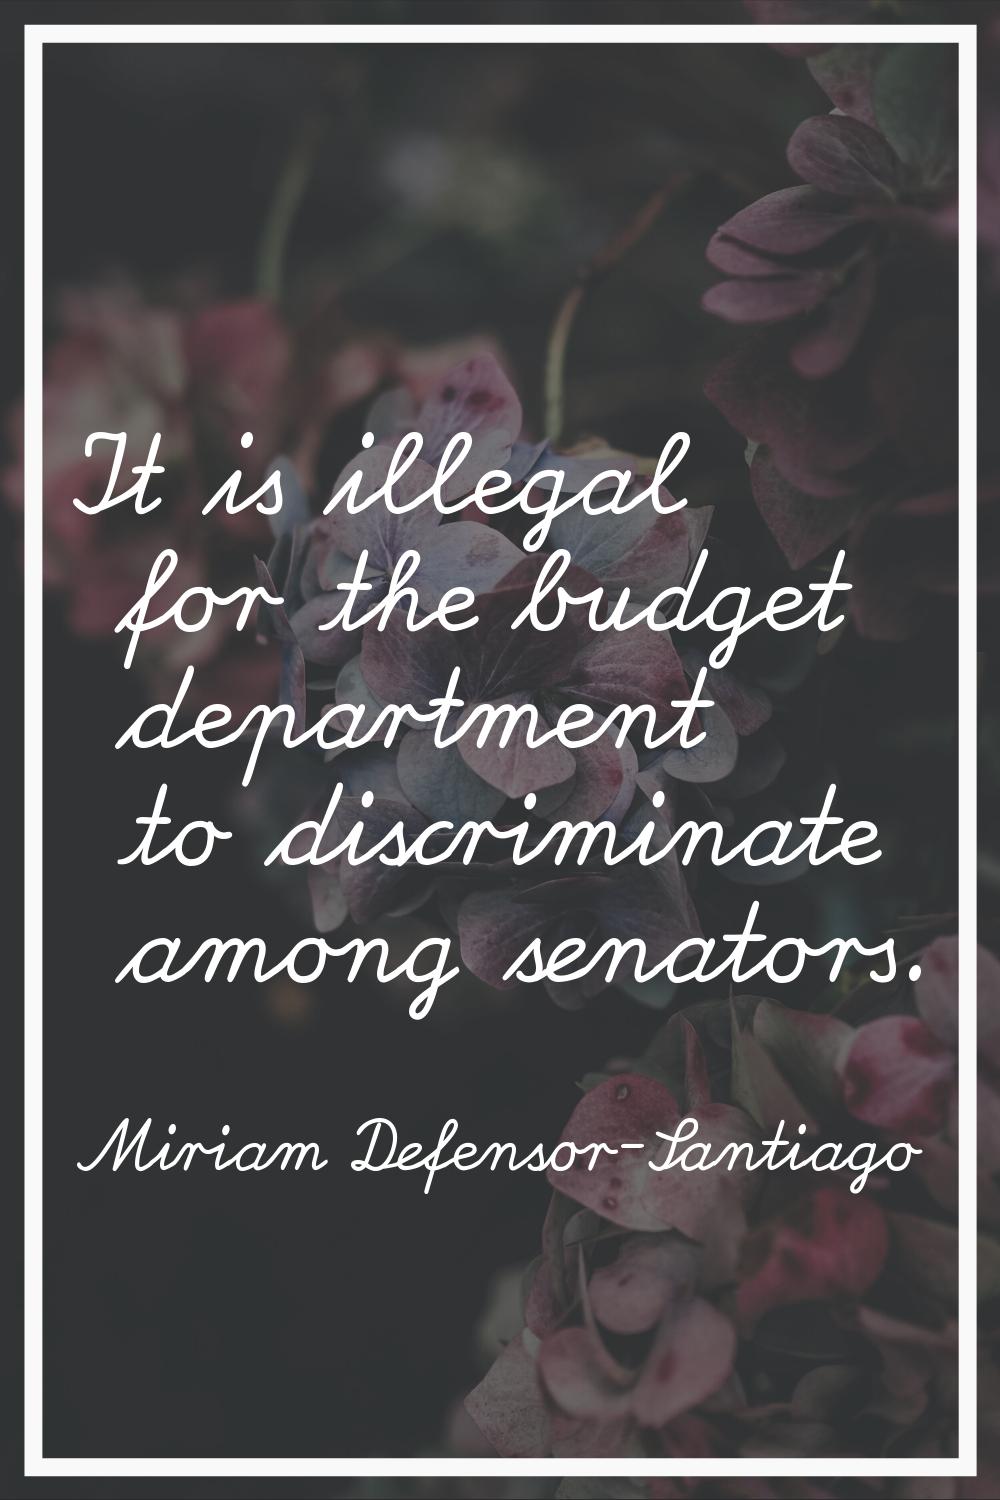 It is illegal for the budget department to discriminate among senators.